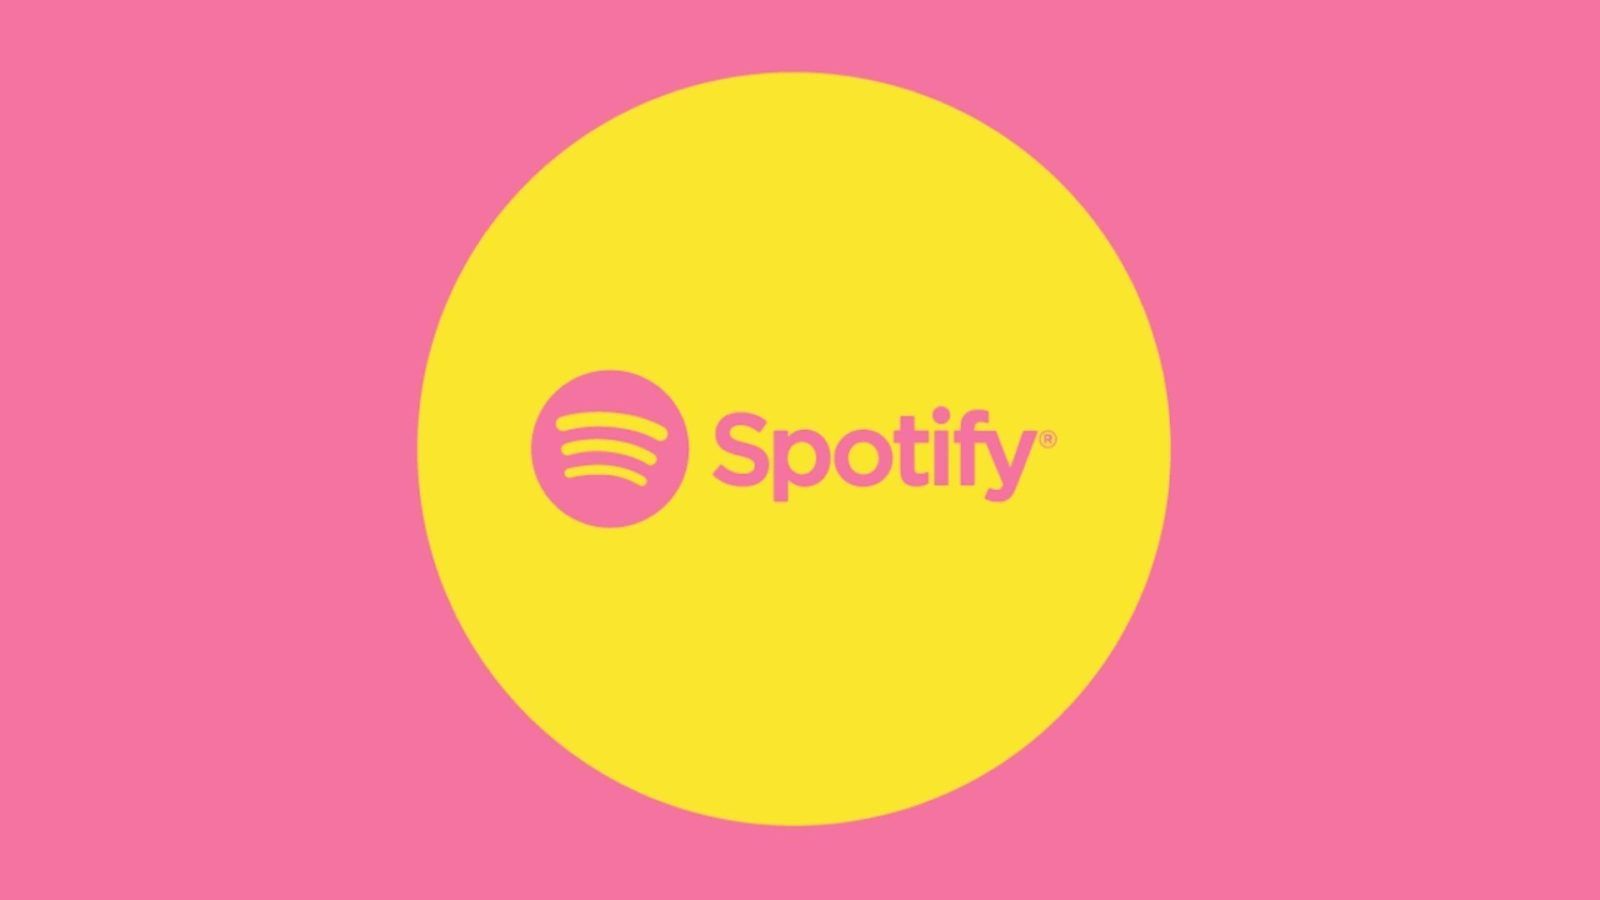 All Spotify updates and features to be introduced in 2022